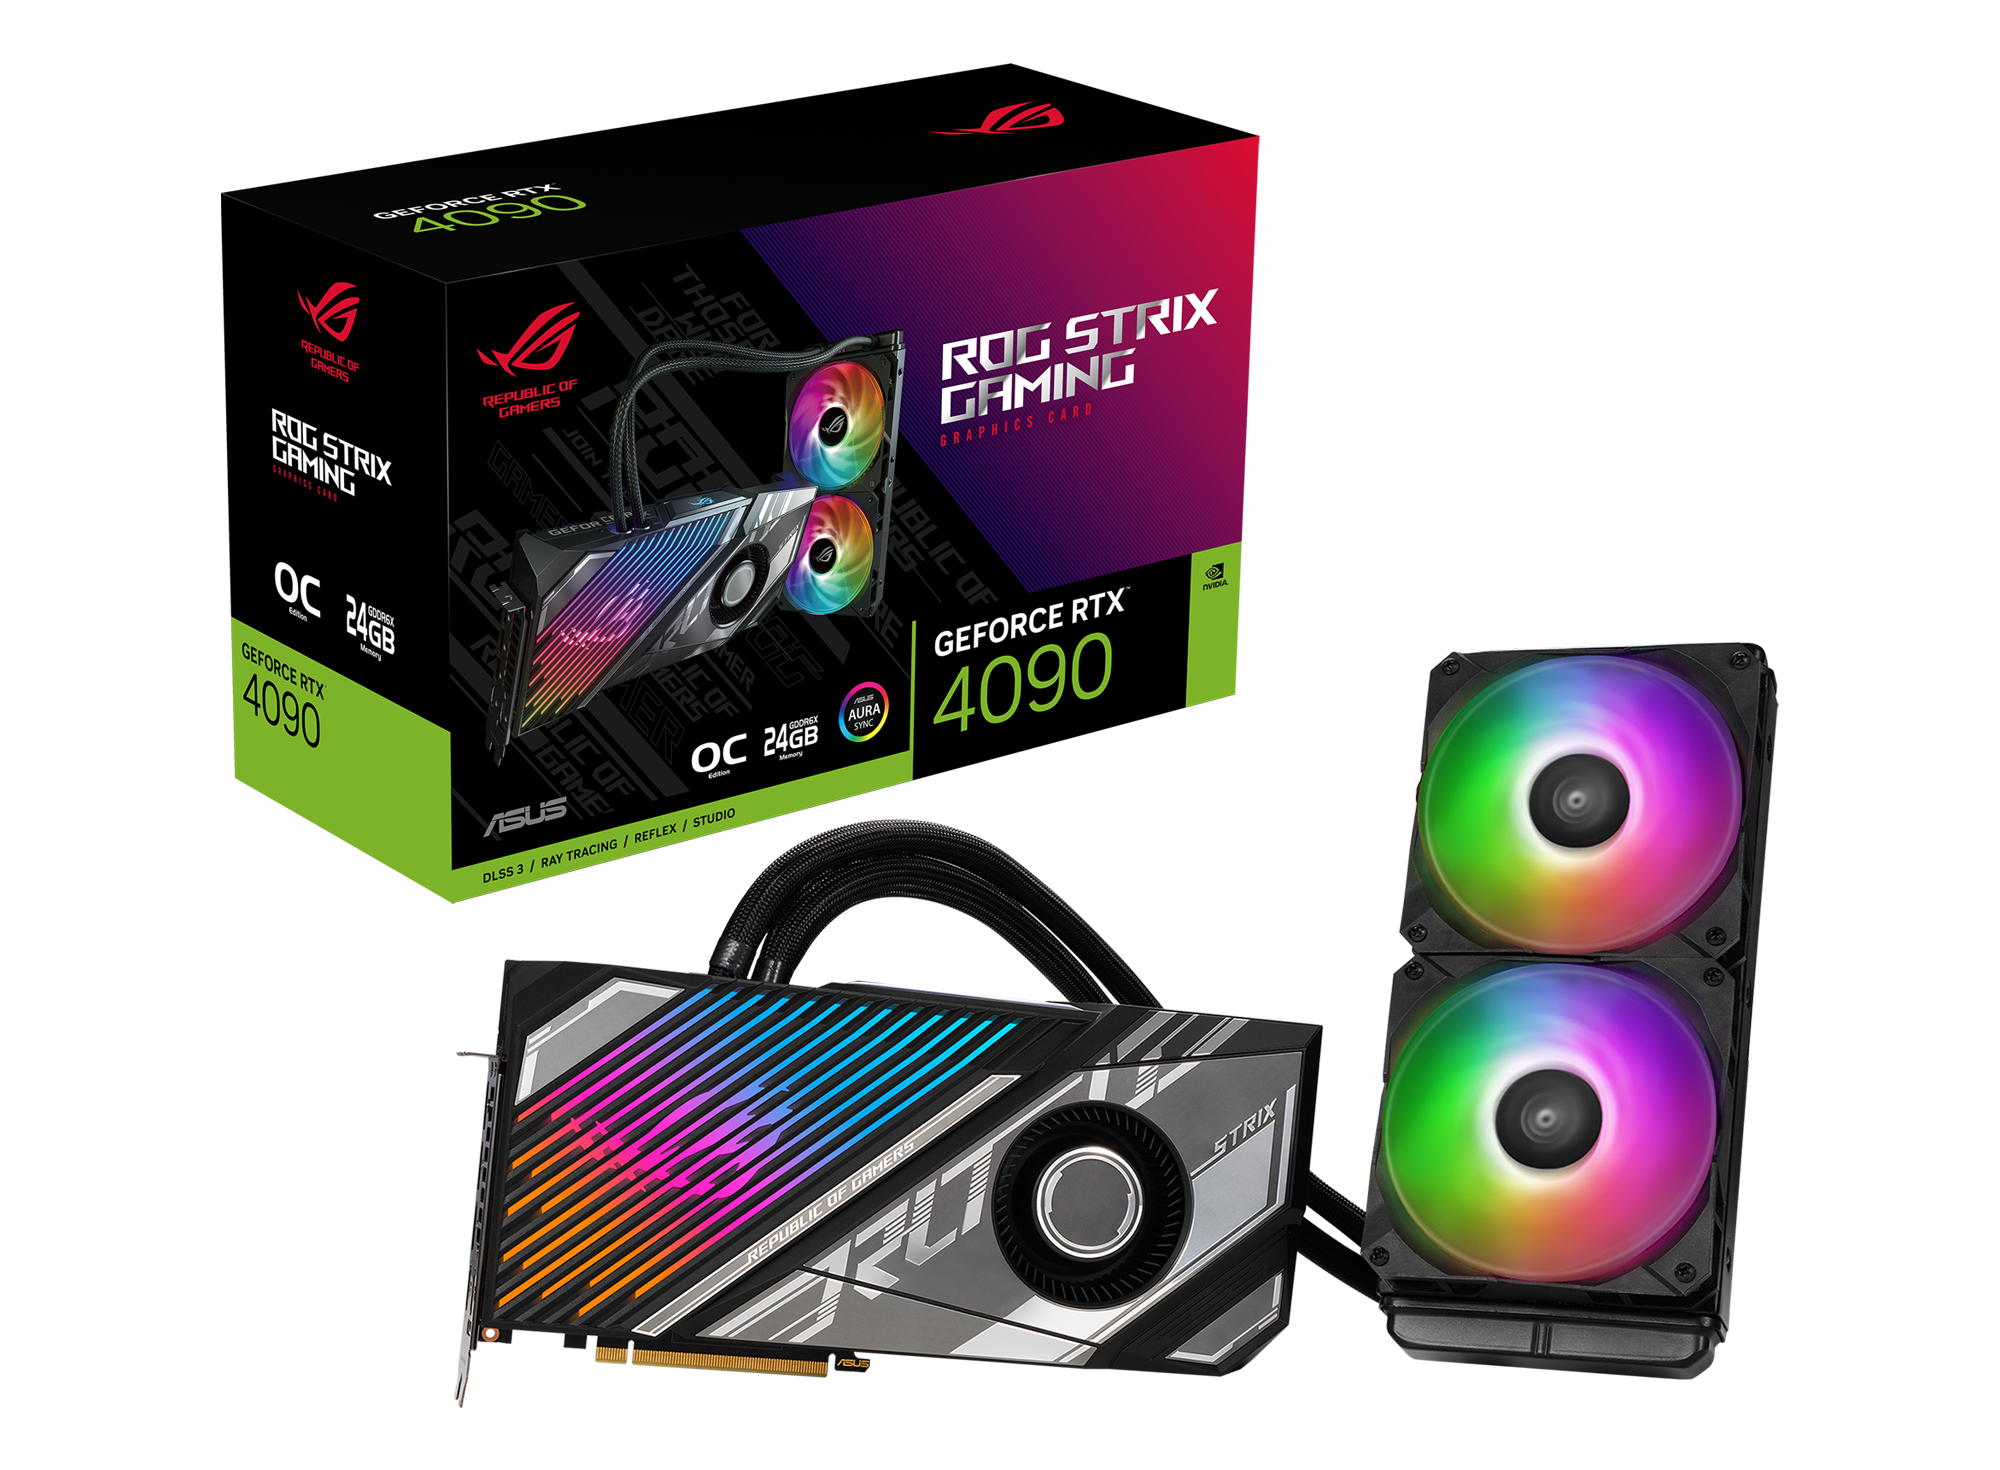 ASUS ROG Strix LC GeForce RTX 4090 24GB OC Edition GDDR6X Gaming Graphics Card with Watercooler thumbnail 1